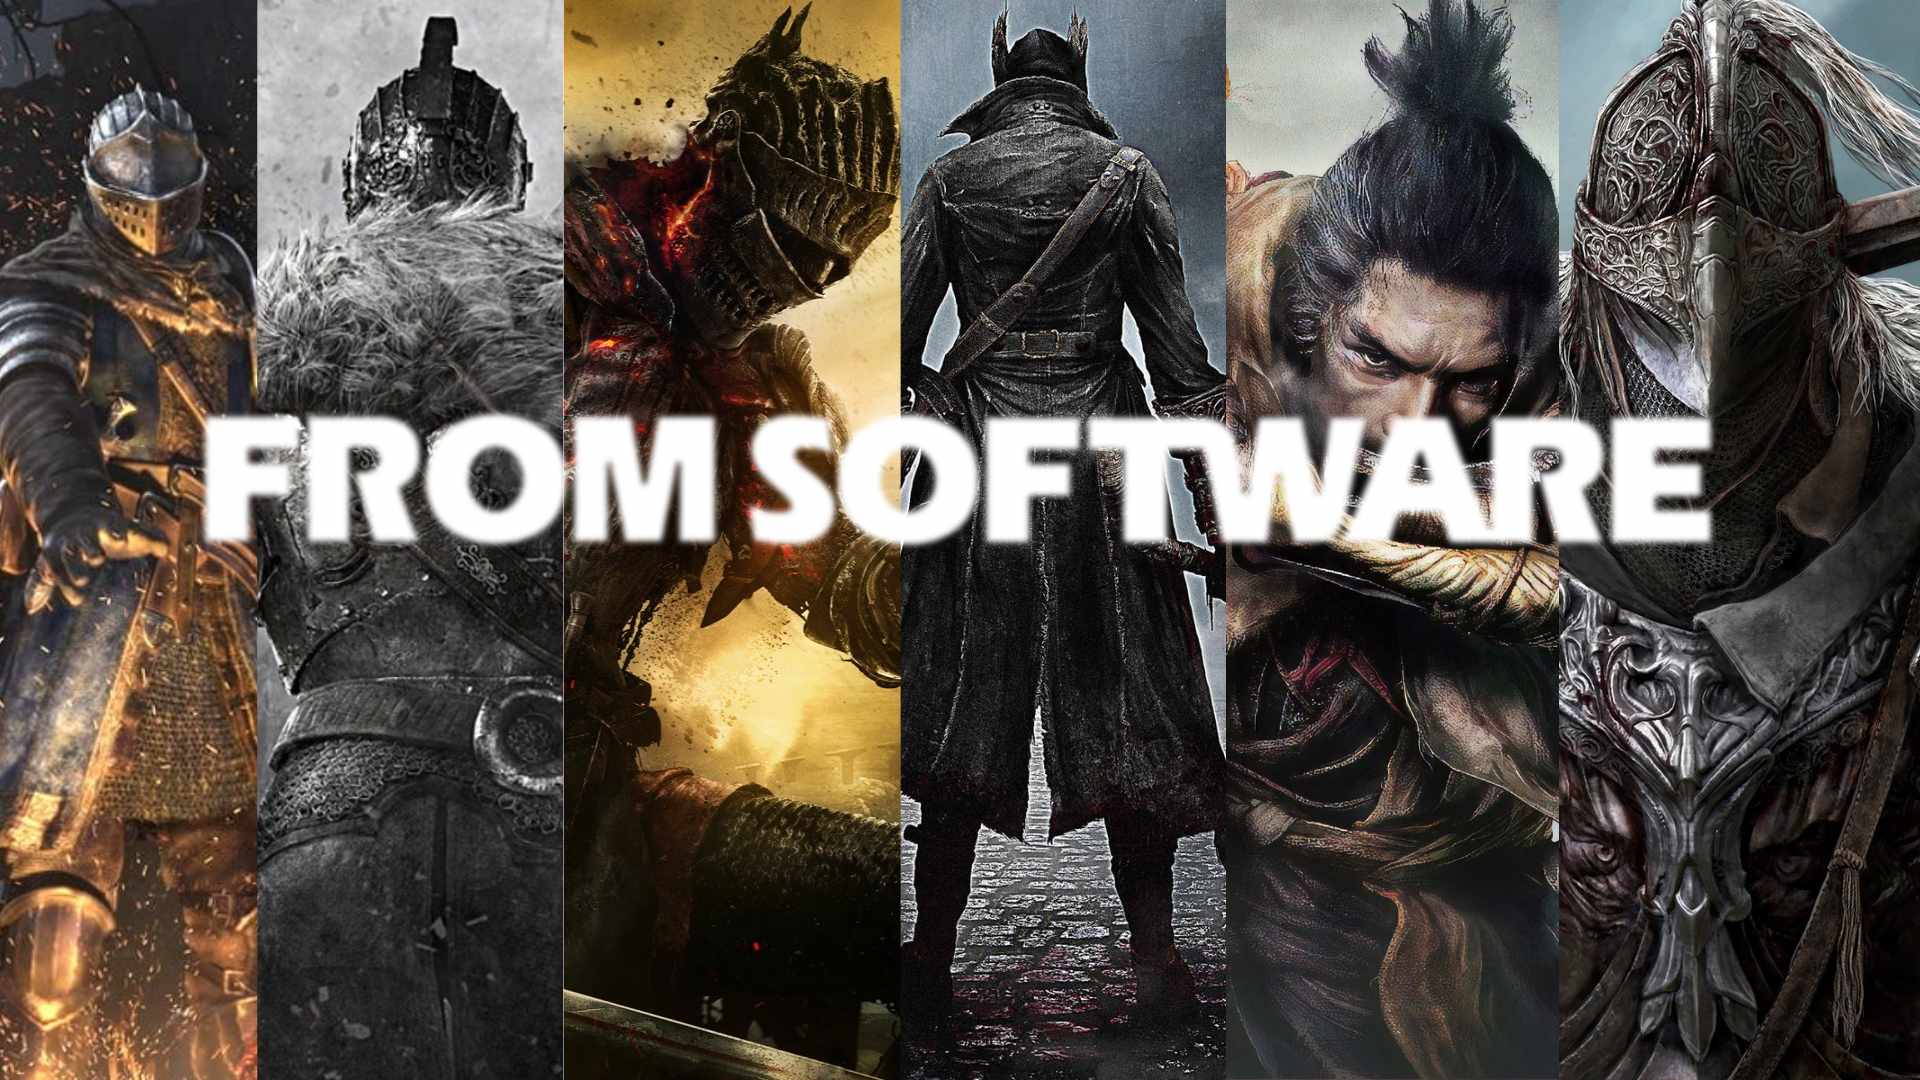 FromSoftware Says Developing Hard Games Is Its Identity